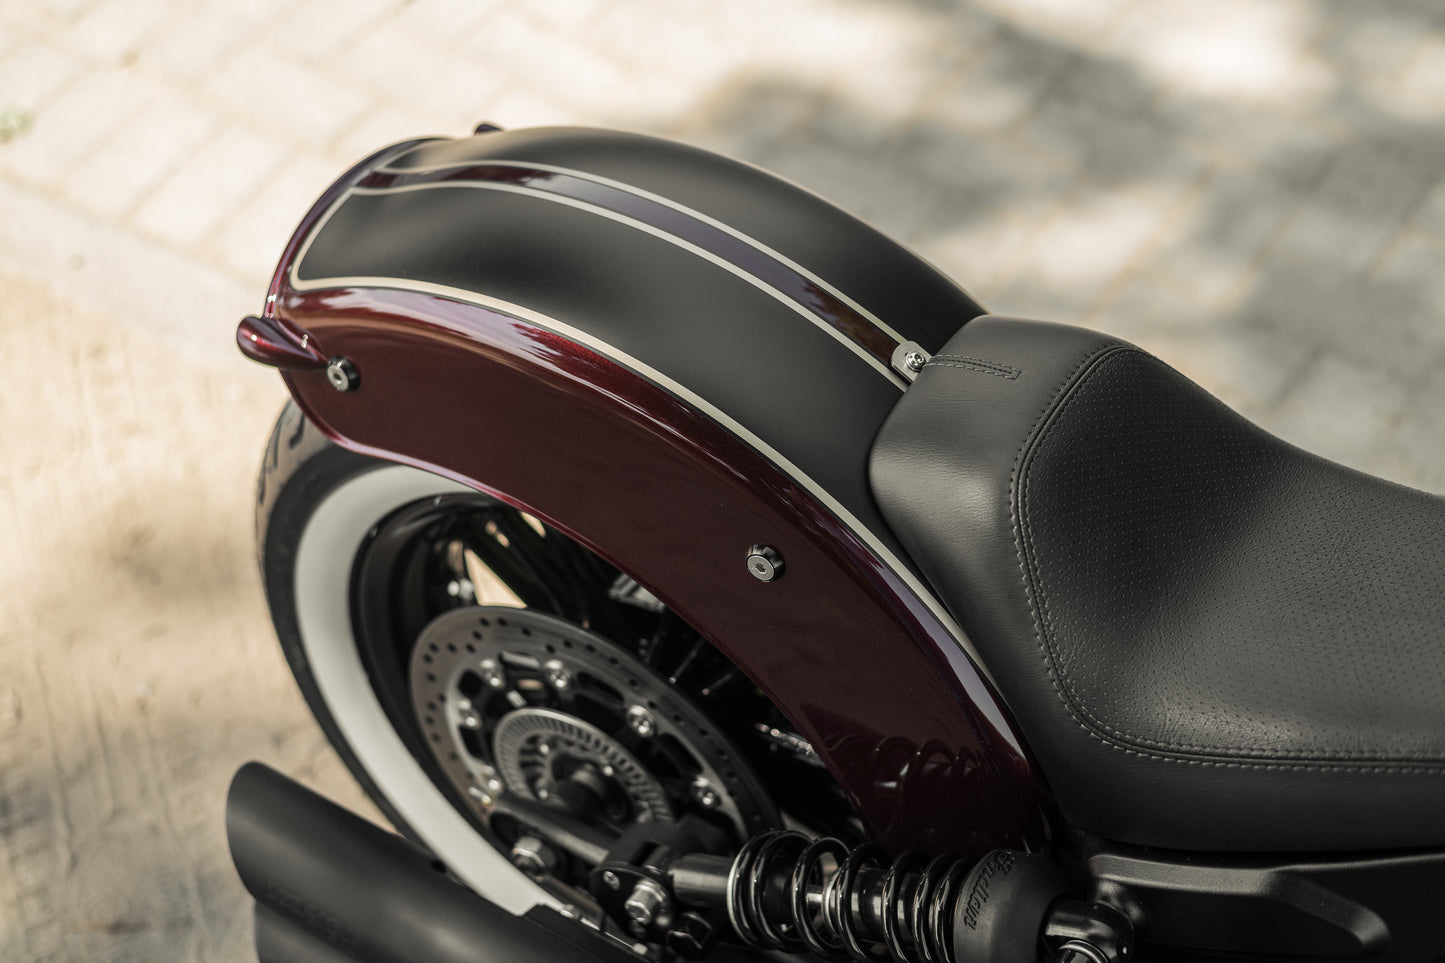 Zoomed Harley Davidson motorcycle with Killer Custom "Apache II" rear fender from above blurry background